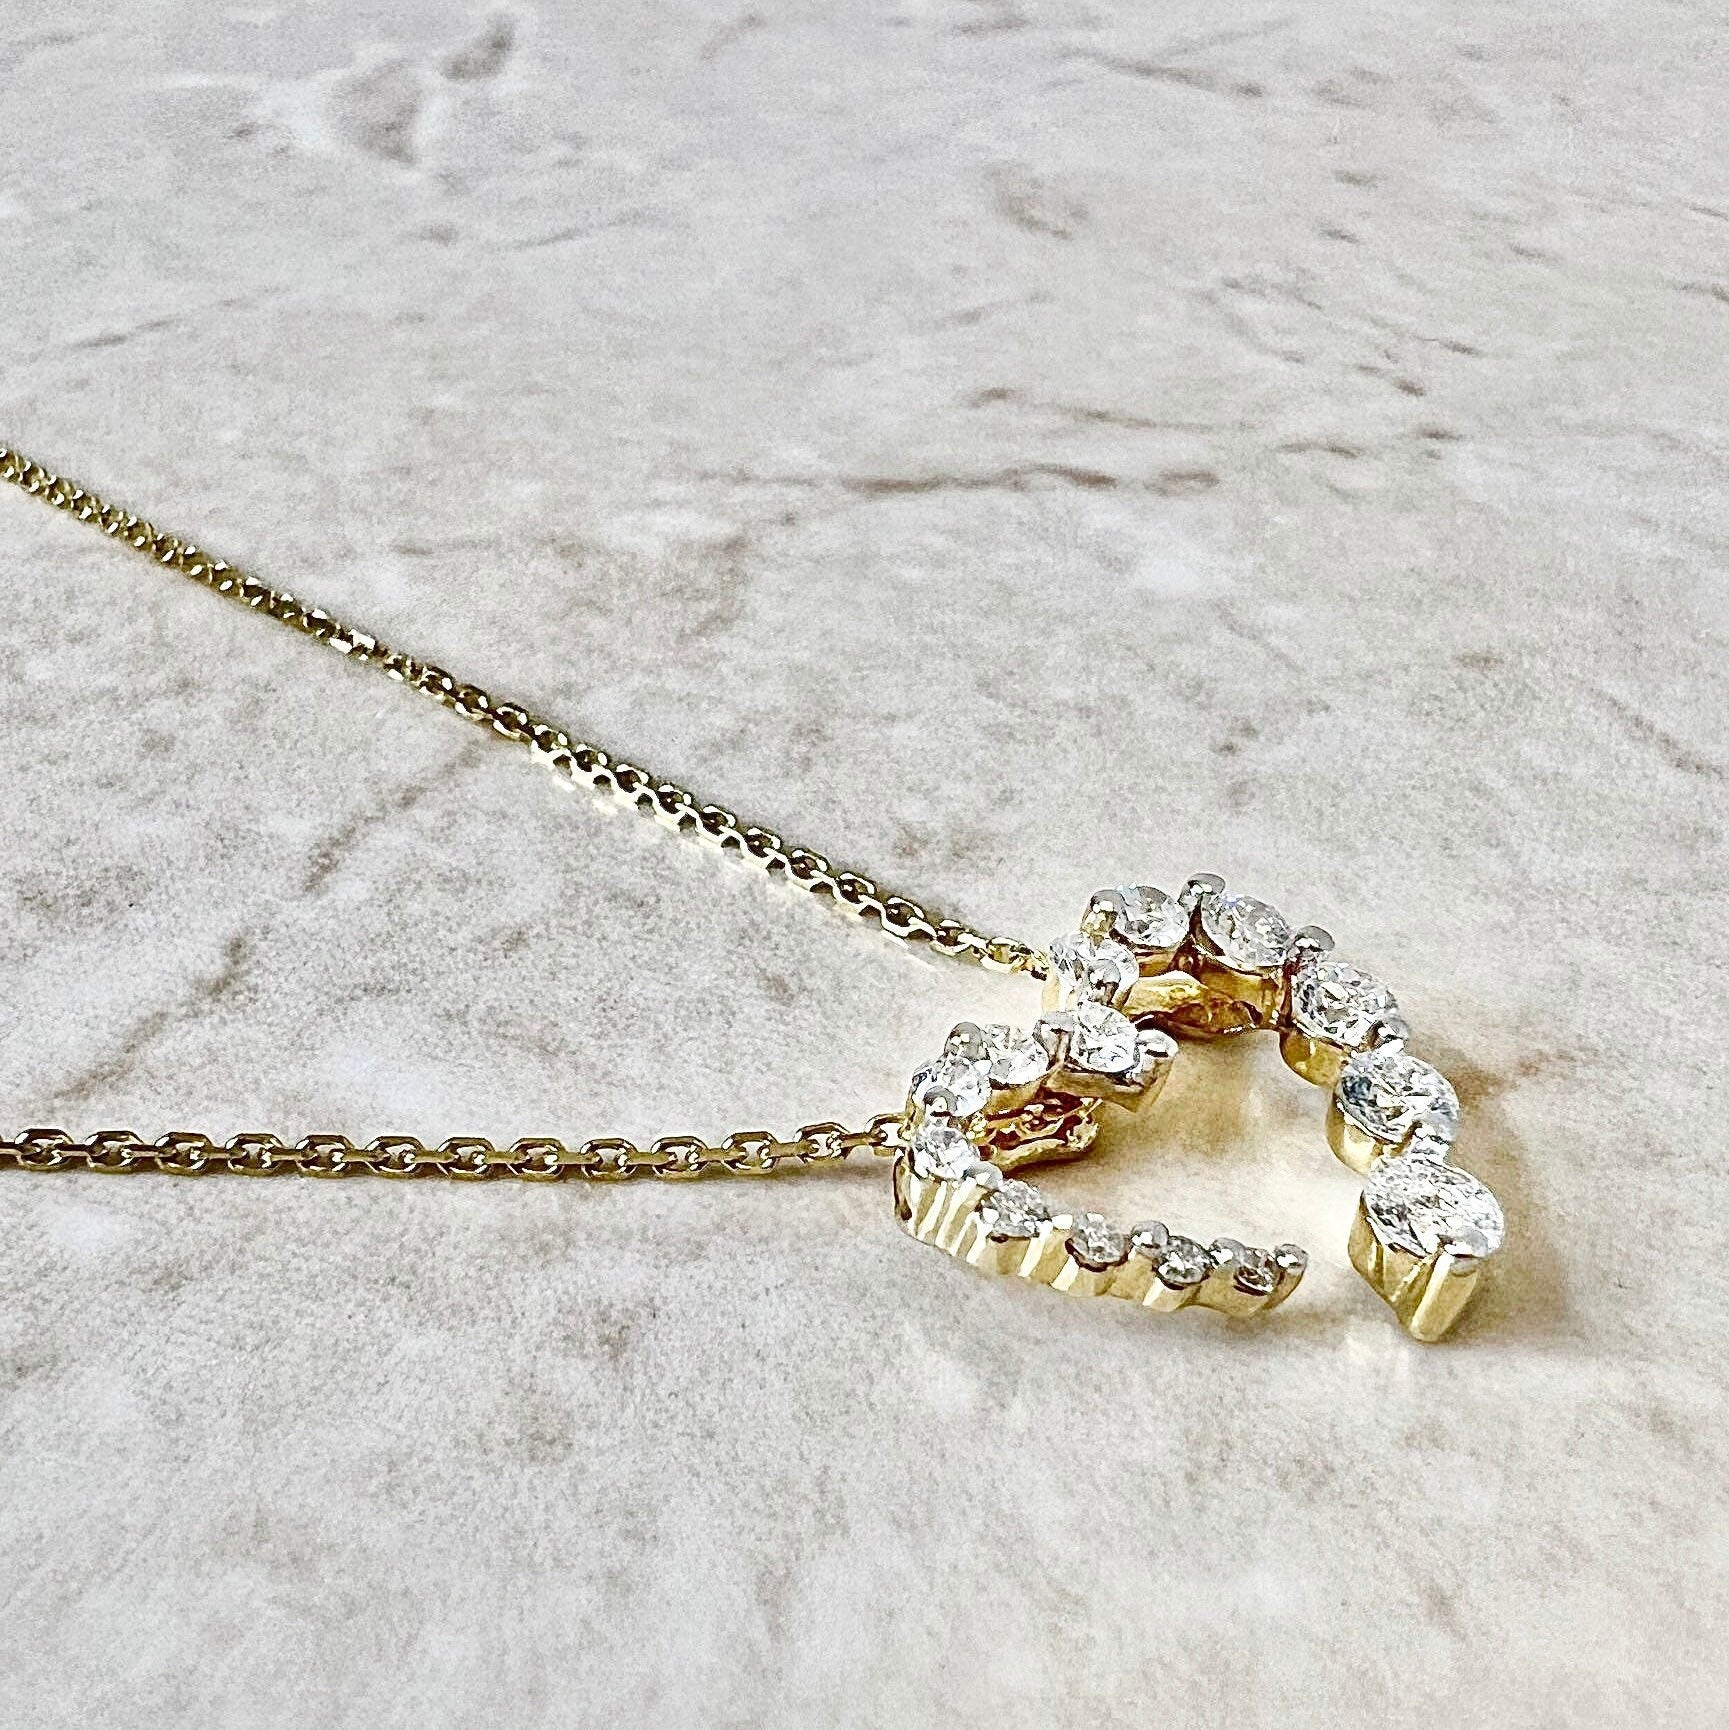 14K Diamond Heart Pendant Necklace - Yellow Gold Diamond Necklace - Heart Necklace - Diamond Pendant - Christmas Best Gifts For Her